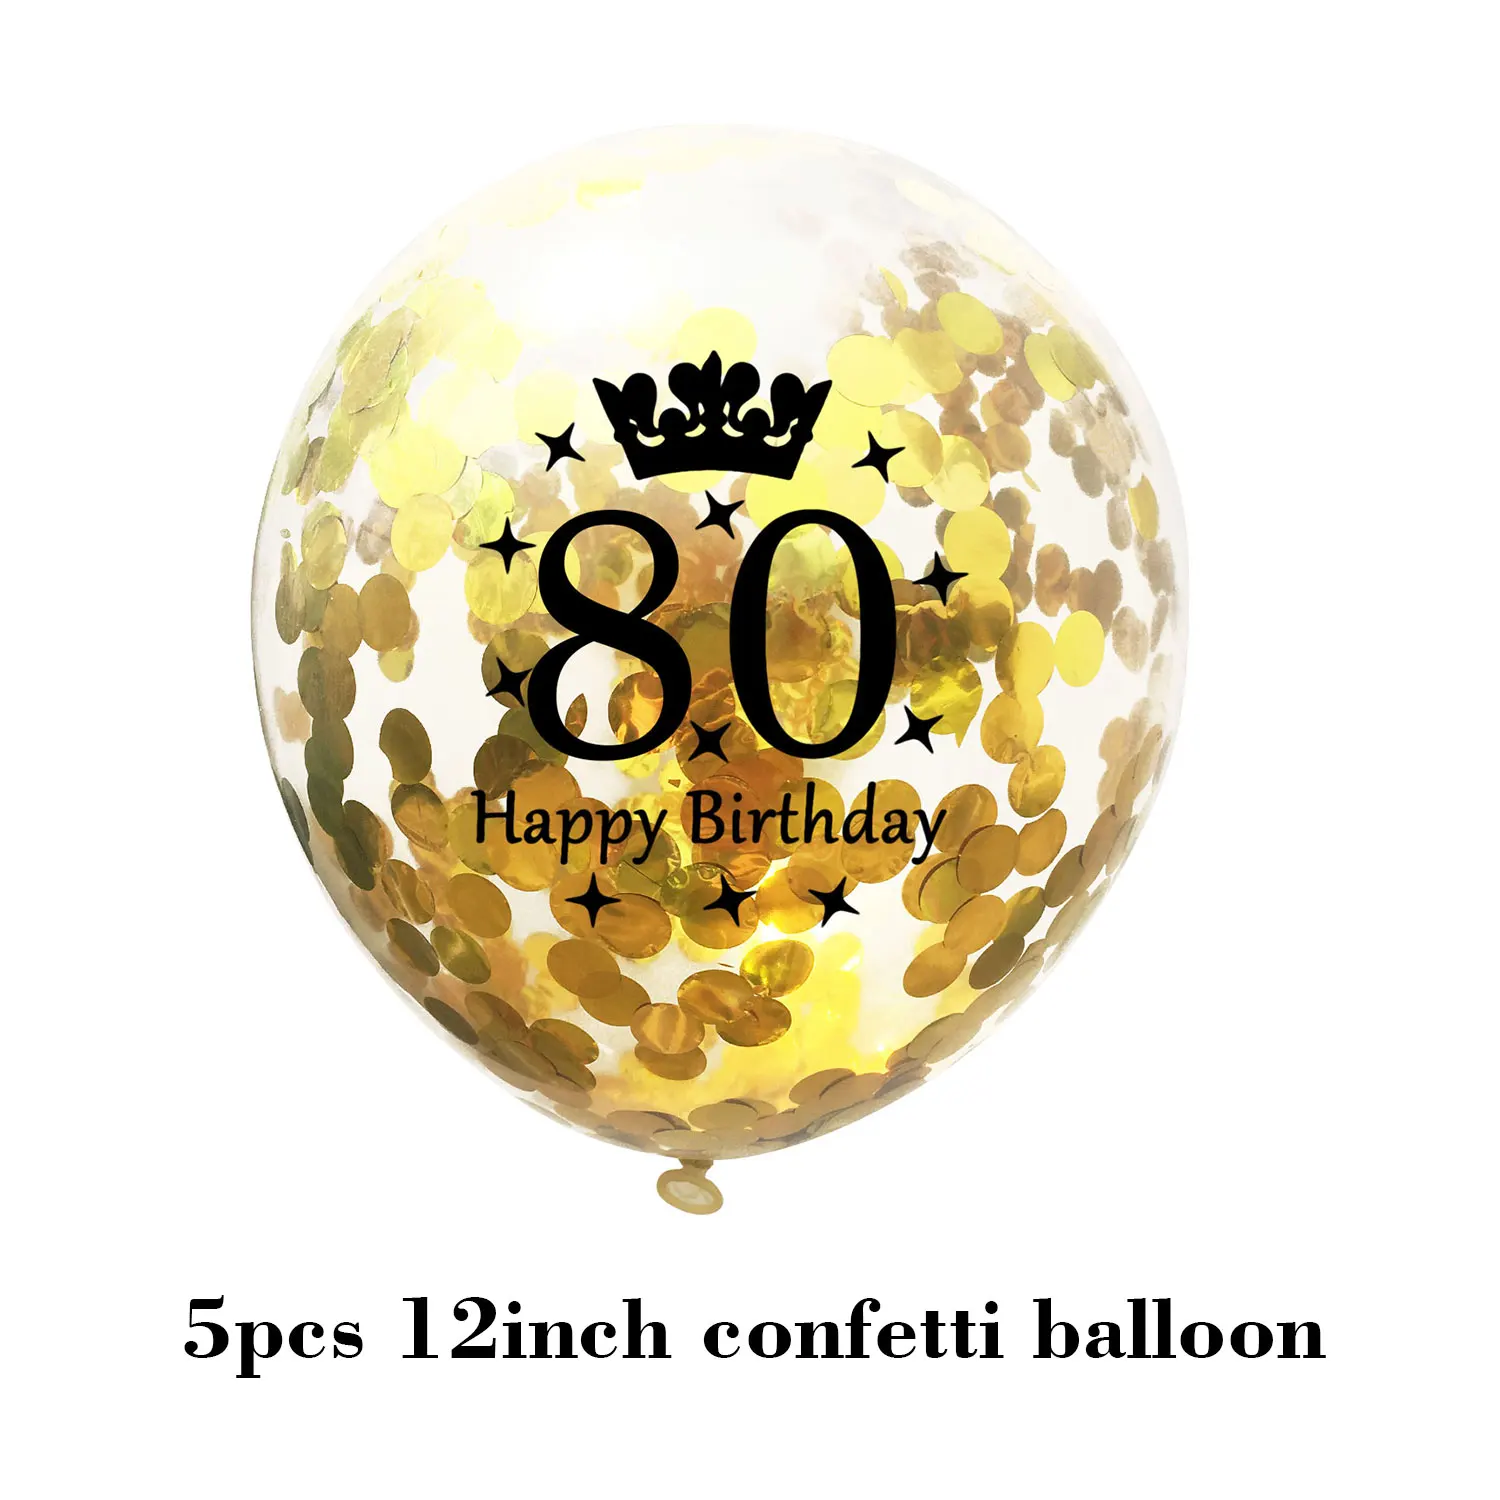 Happy Birthday Confetti Balloon Number Balloon Adult Birthday Cake Topper Gift Sticker For 16 18 21 30 40 50 60 Years Decoration - Цвет: 80 gold balloon